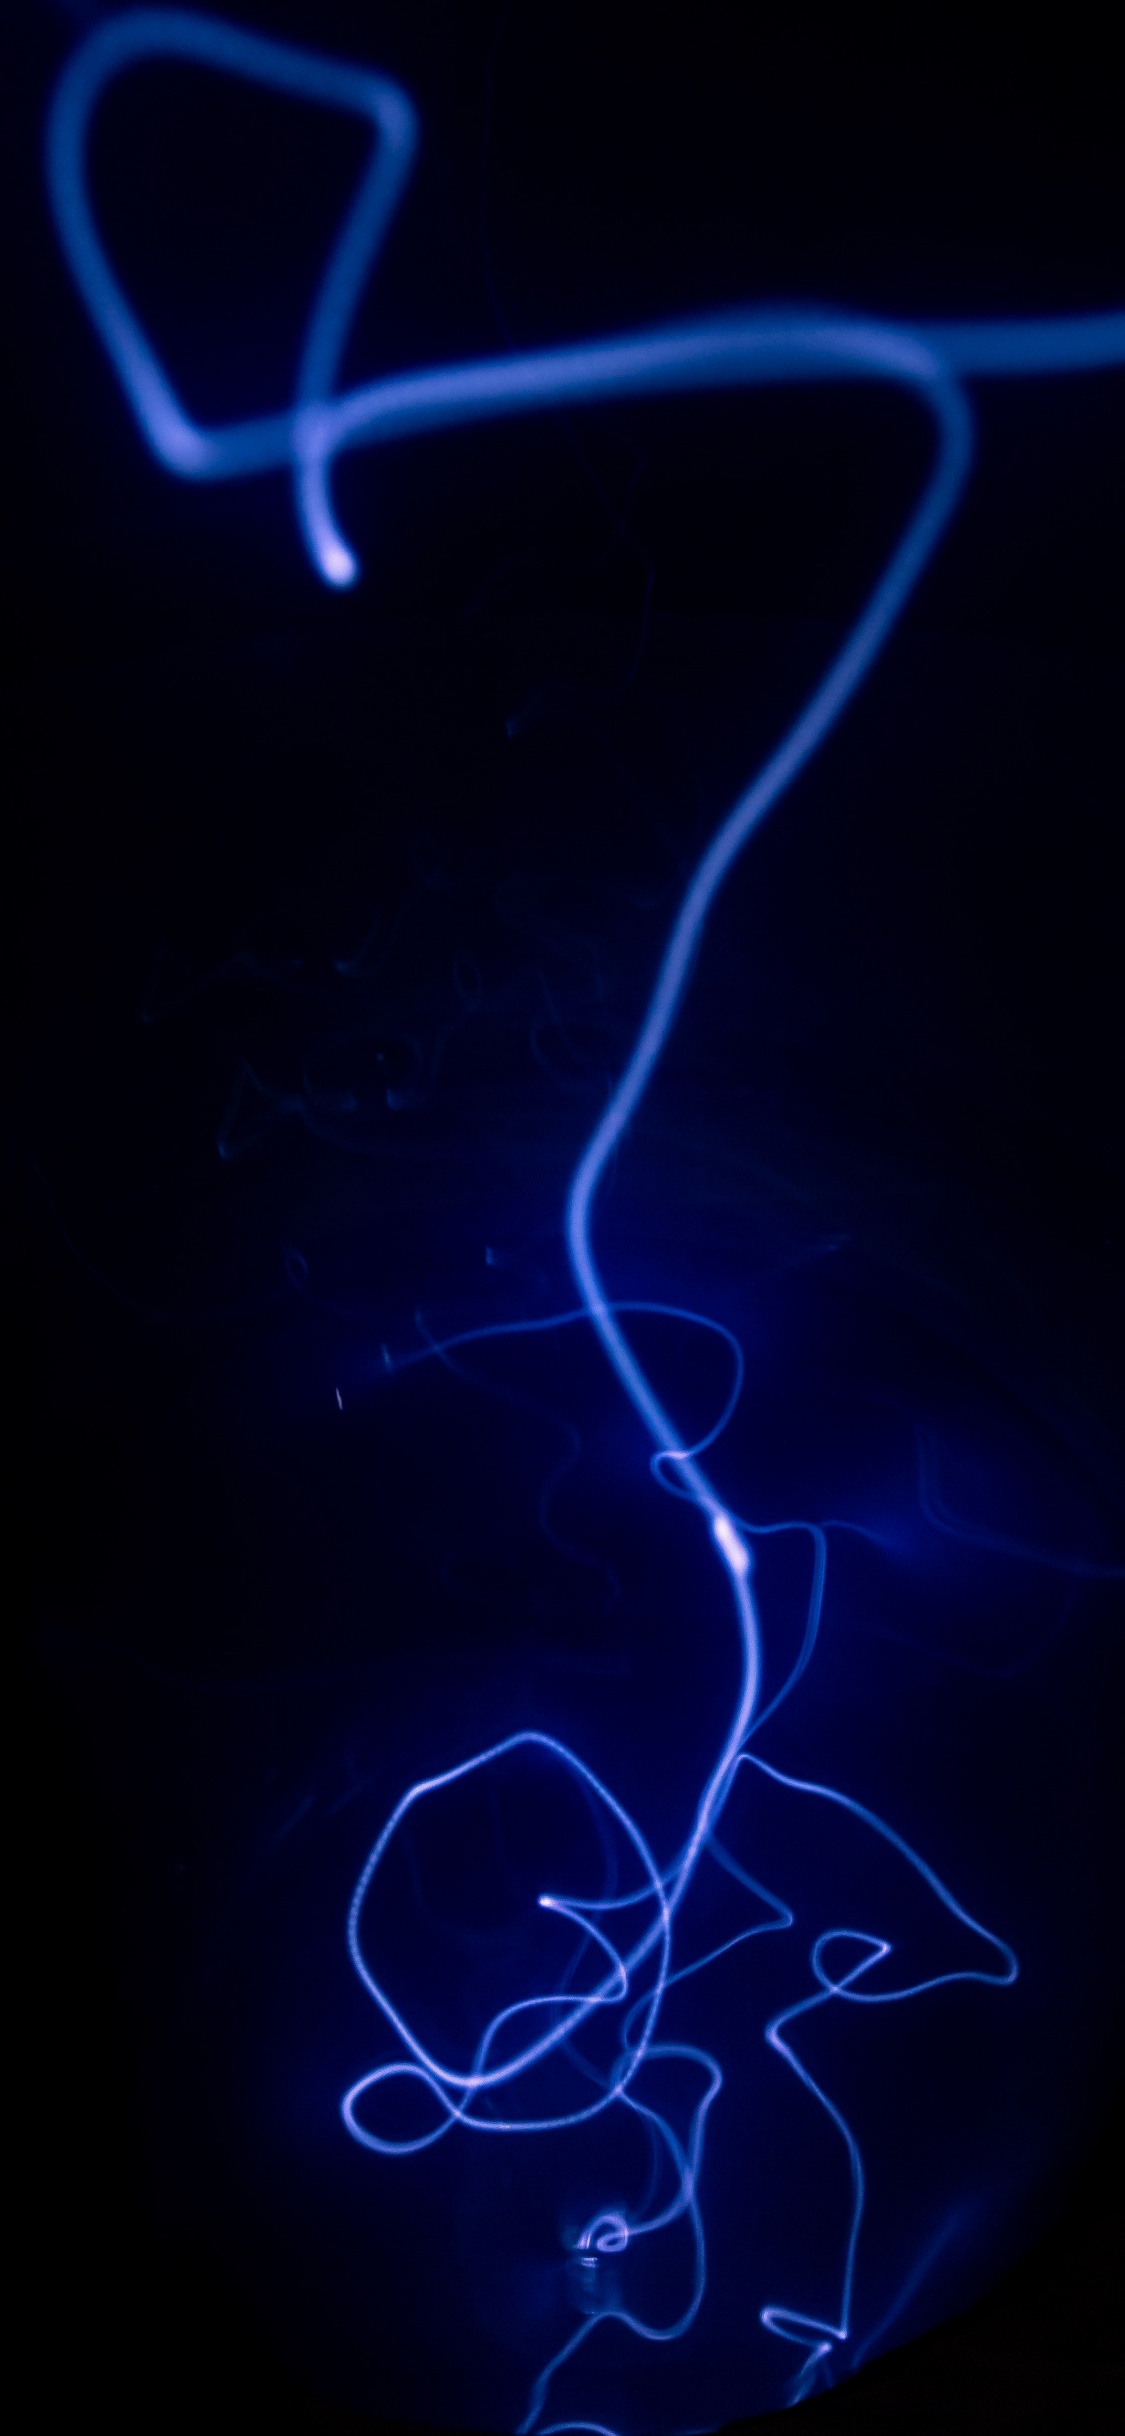 Blue and White Light Illustration. Wallpaper in 1125x2436 Resolution